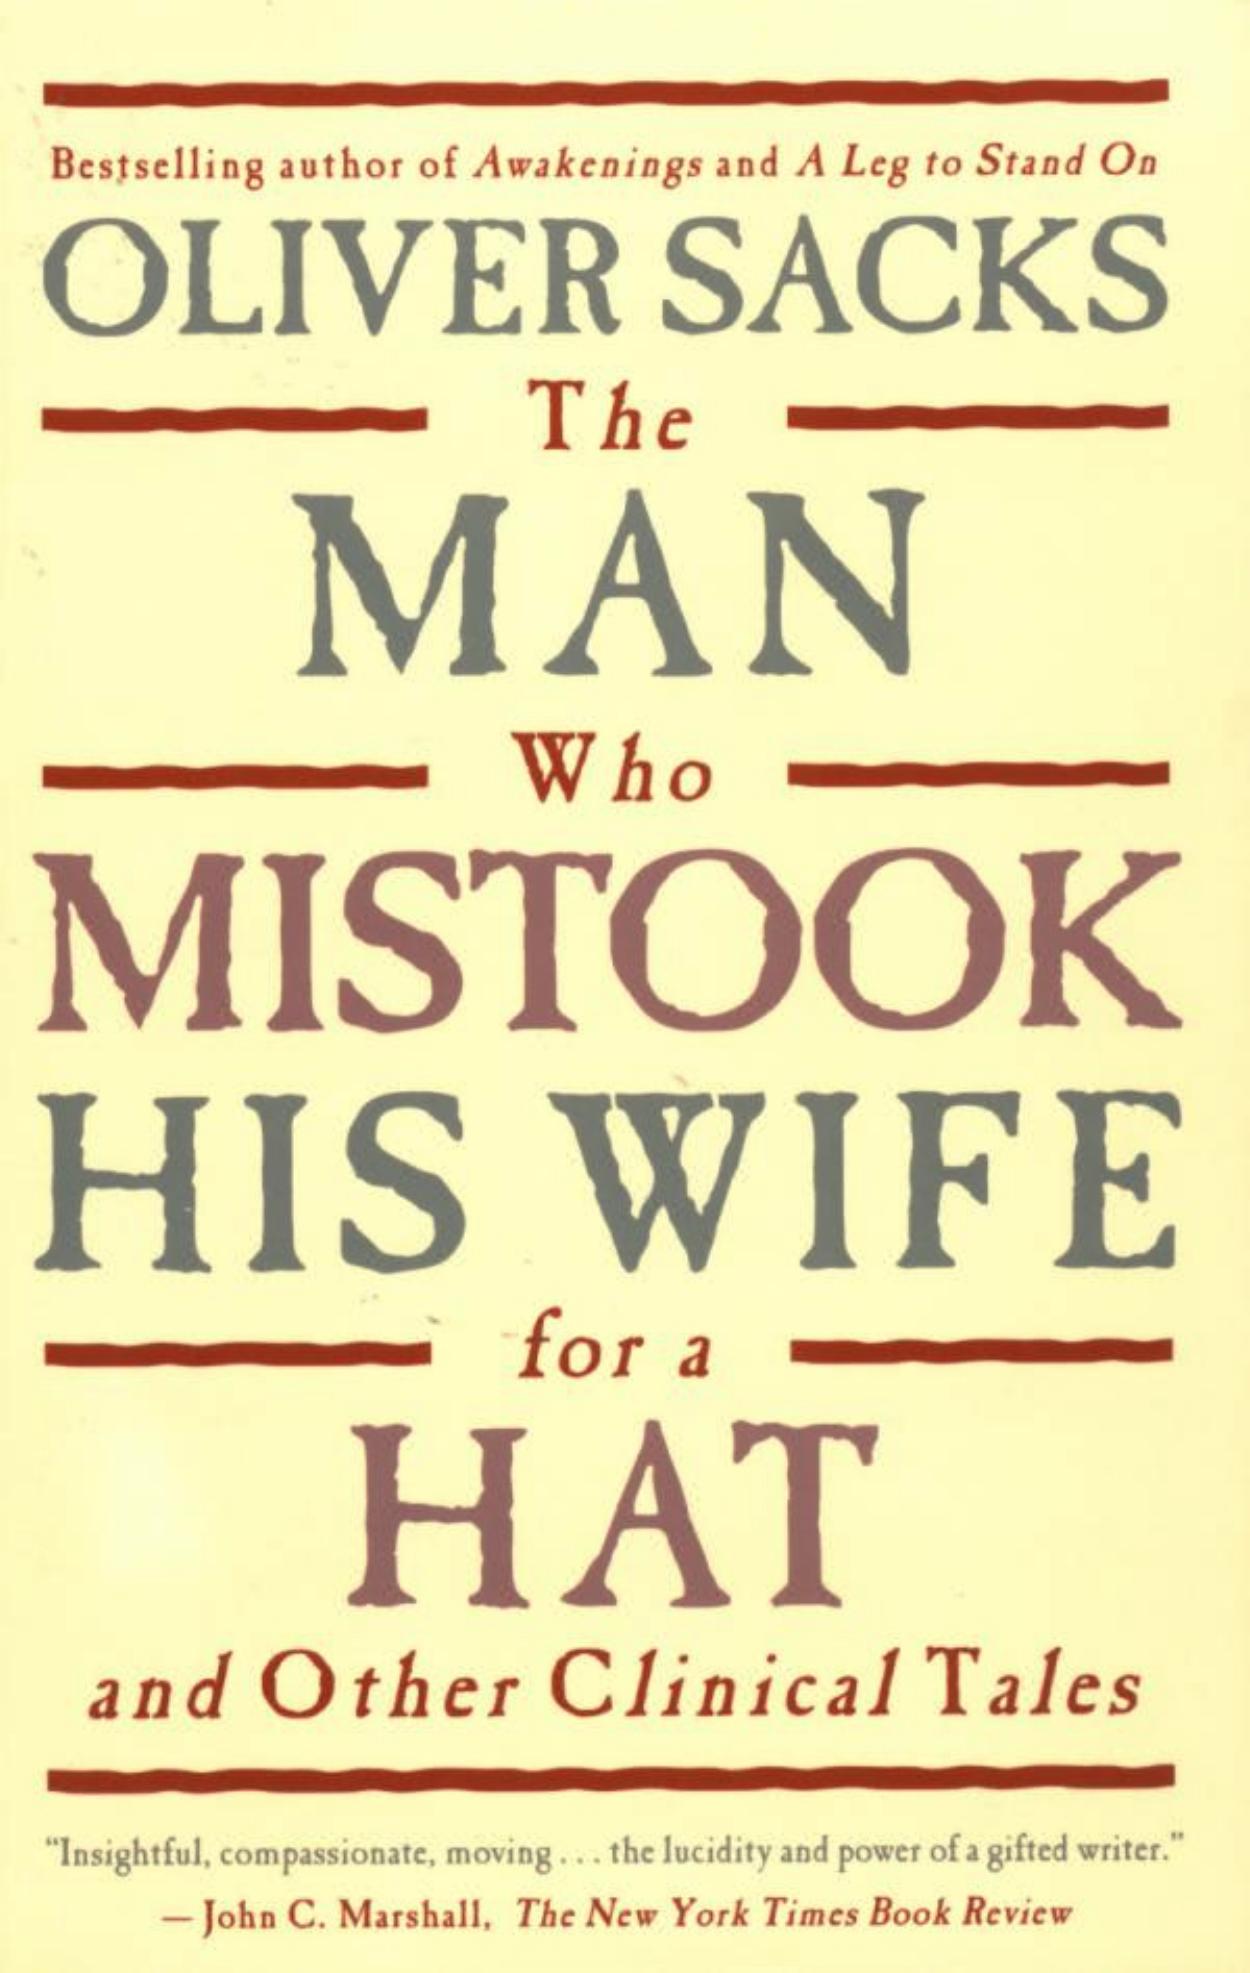 The Man Who Mistook His Wife for a Hat and Other Clinical Tales